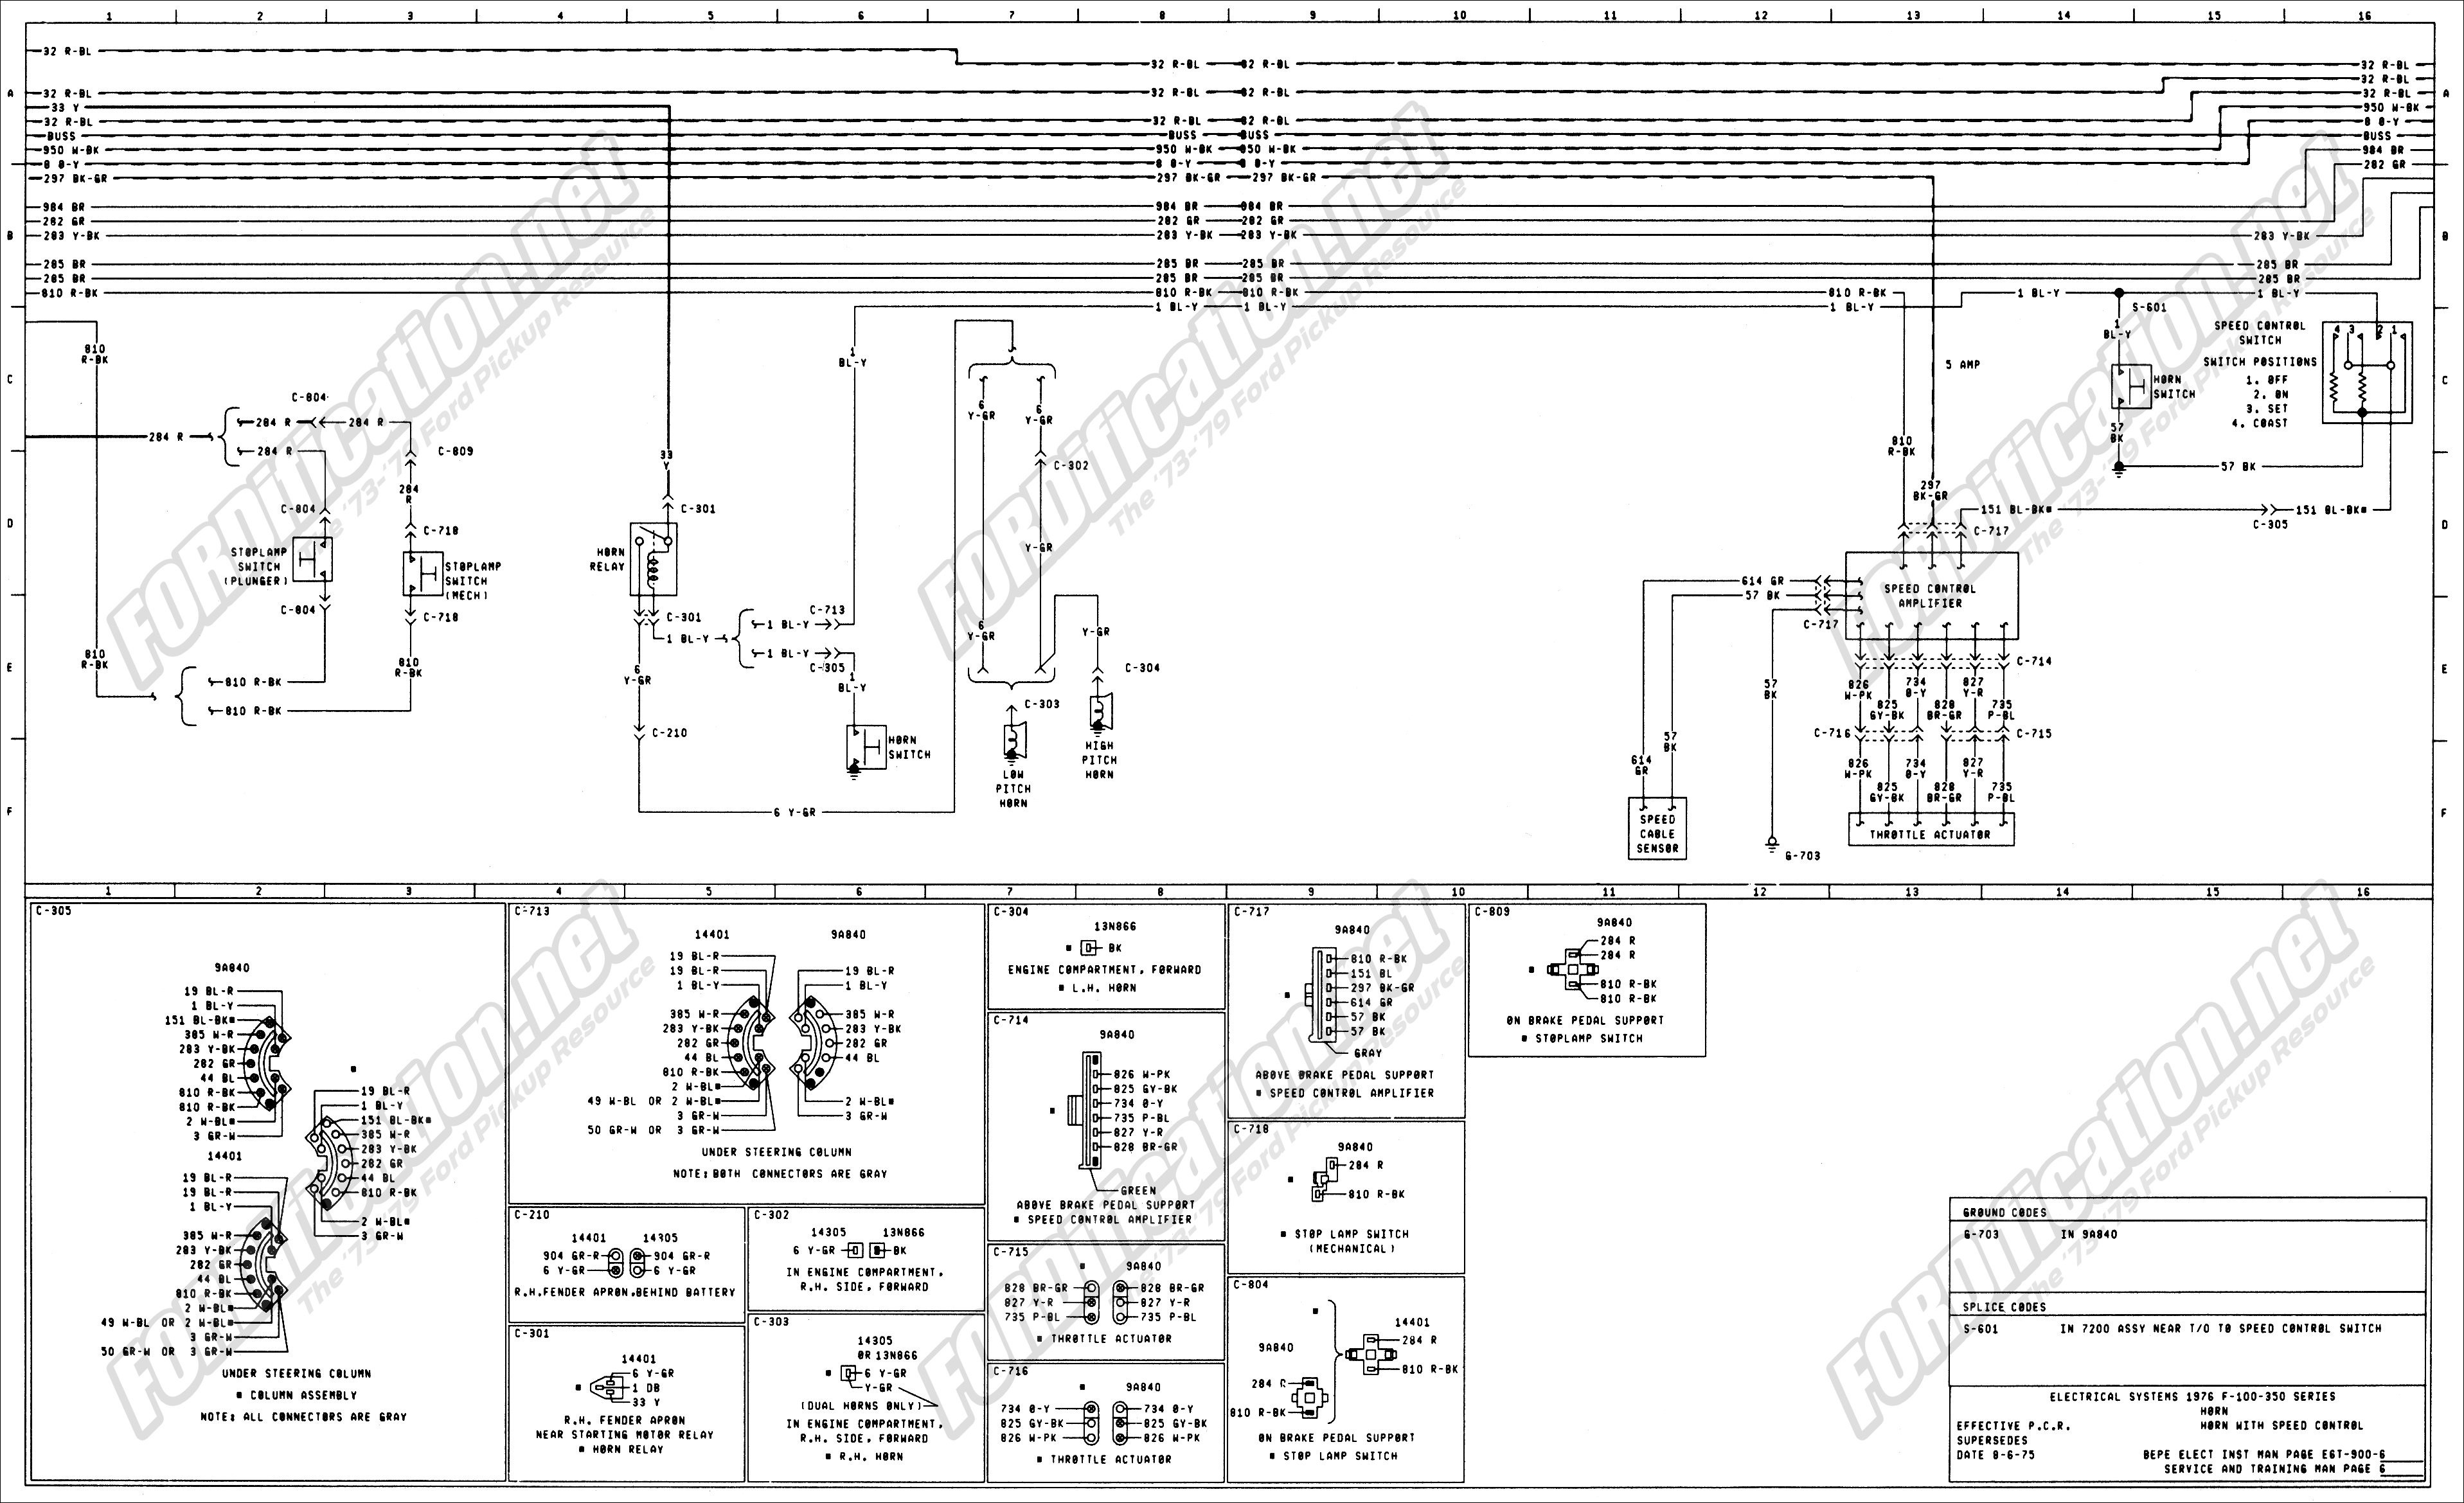 1971 Ford F250 Wiring Diagram from mainetreasurechest.com